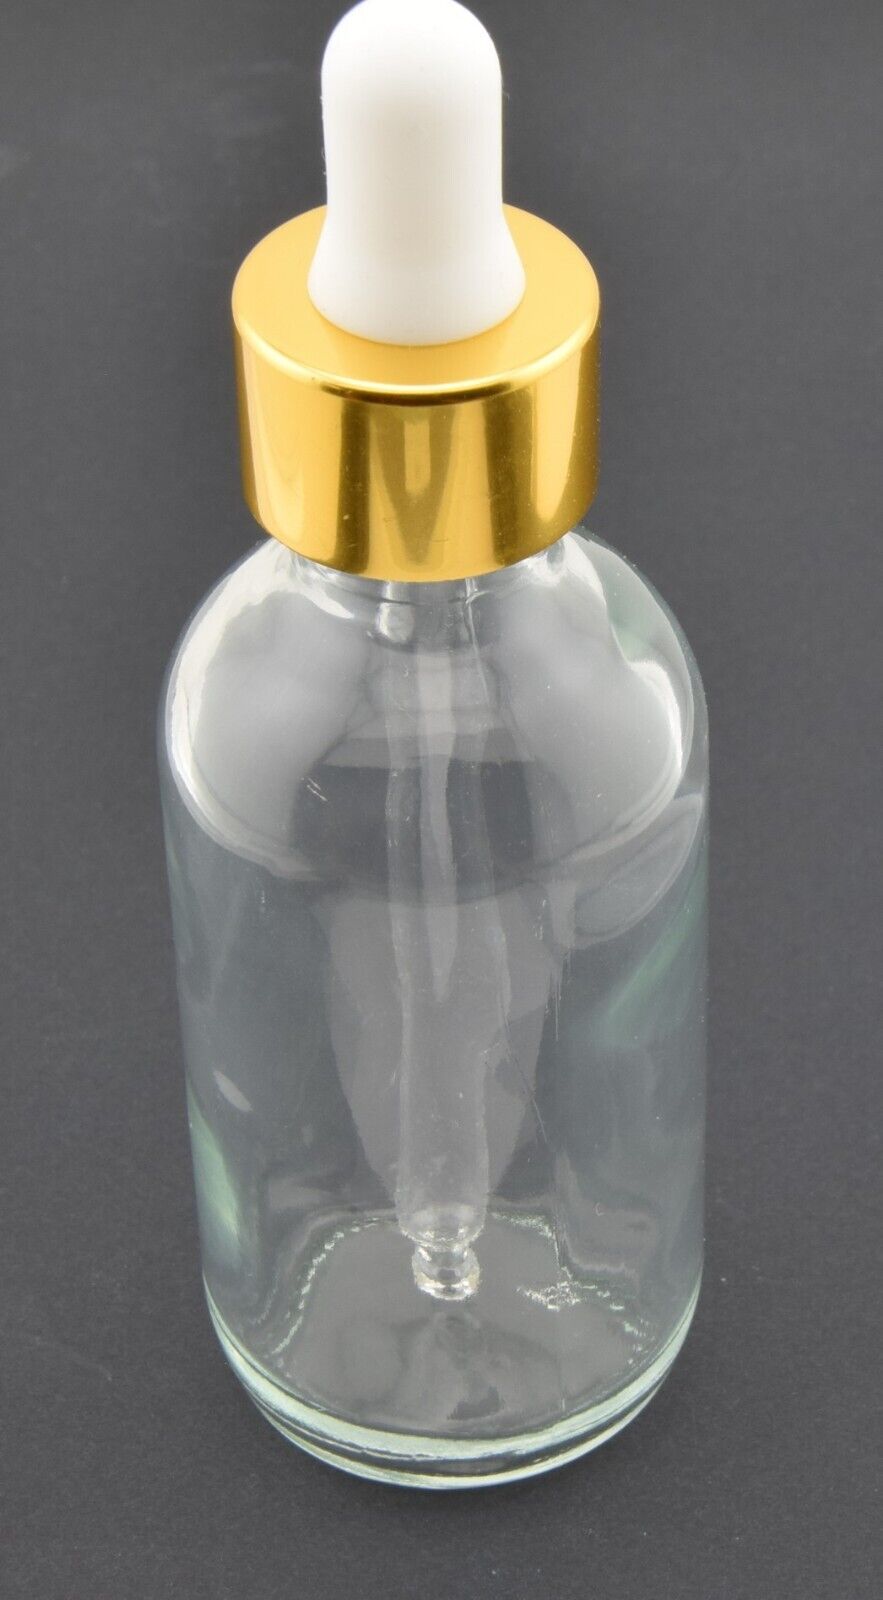 Glass Eye Dropper Bottle for Essential Oils Perfumes Liquids 4-1/2" Tall 60 Ml - Dave's Hobby Shop by W5SWL